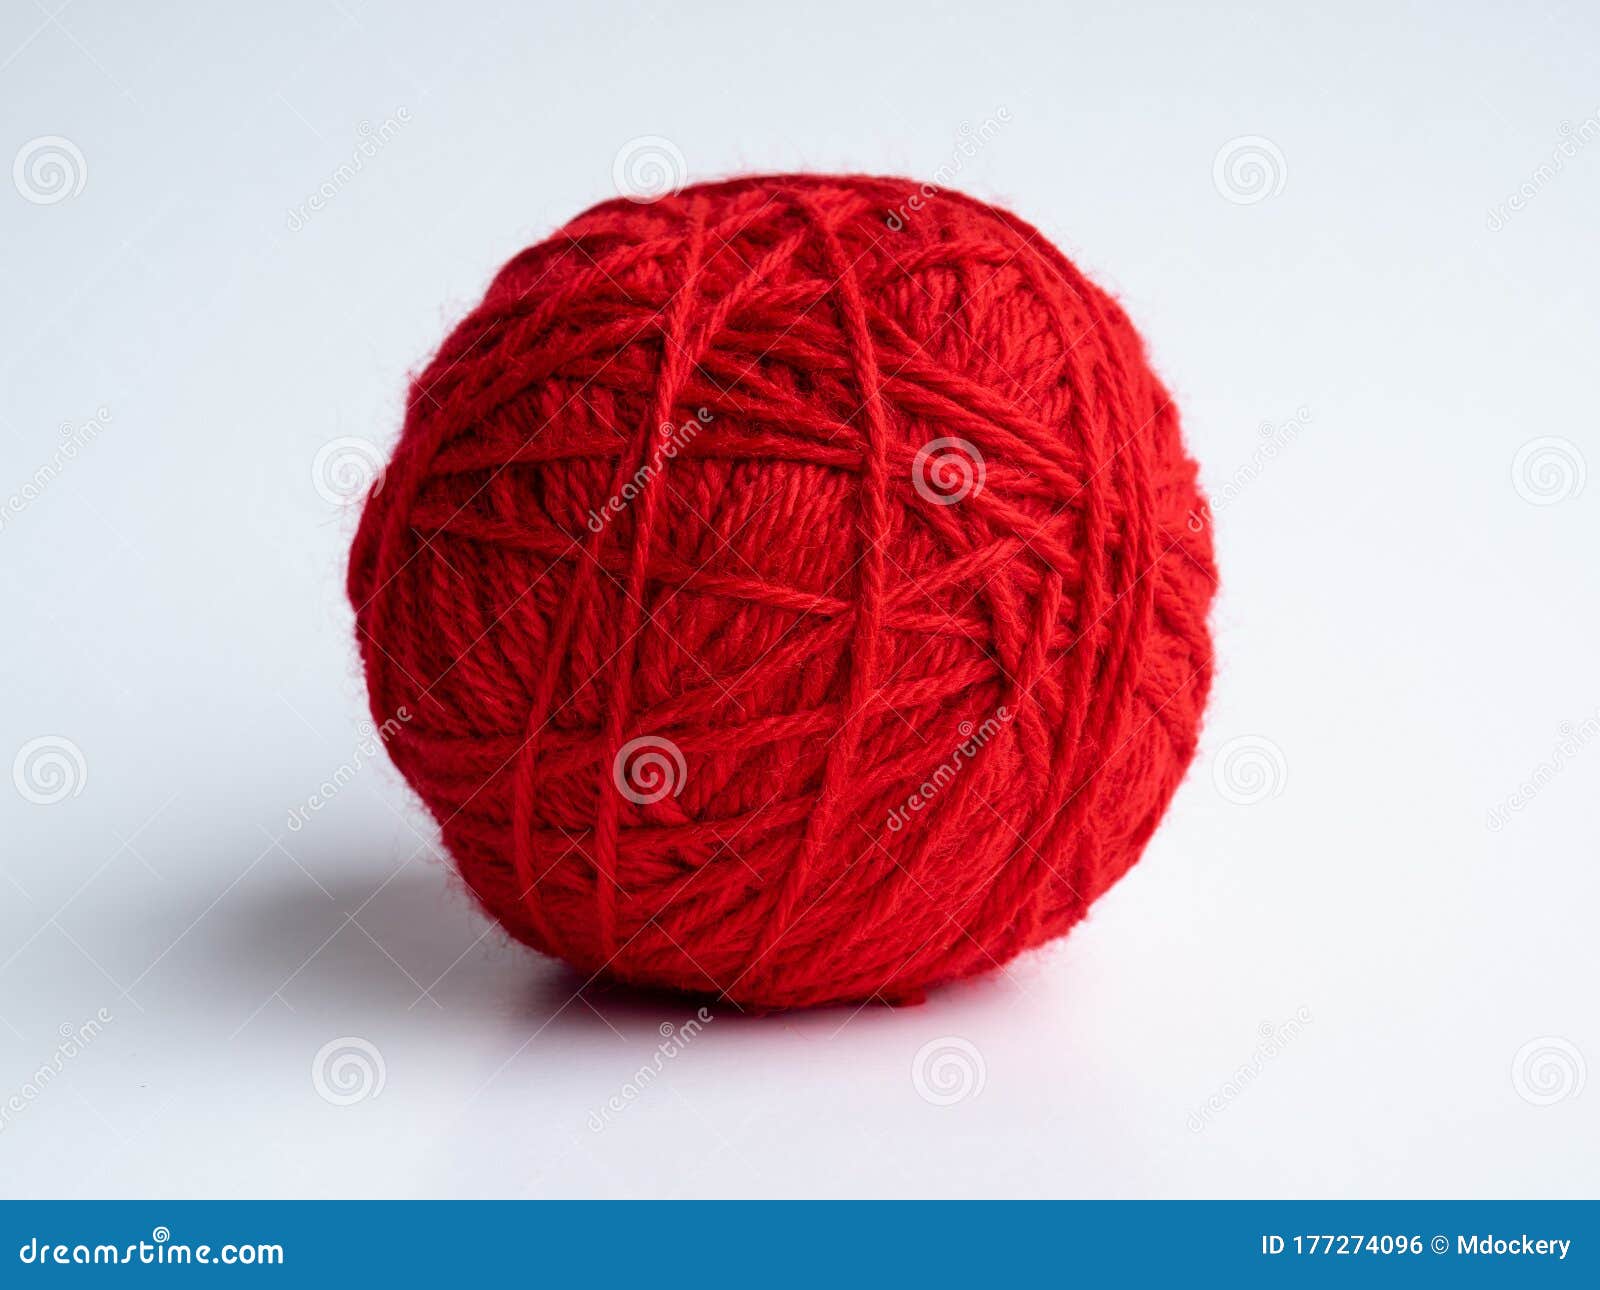 of red yarn stock photo. Image of knitting, skein - 177274096